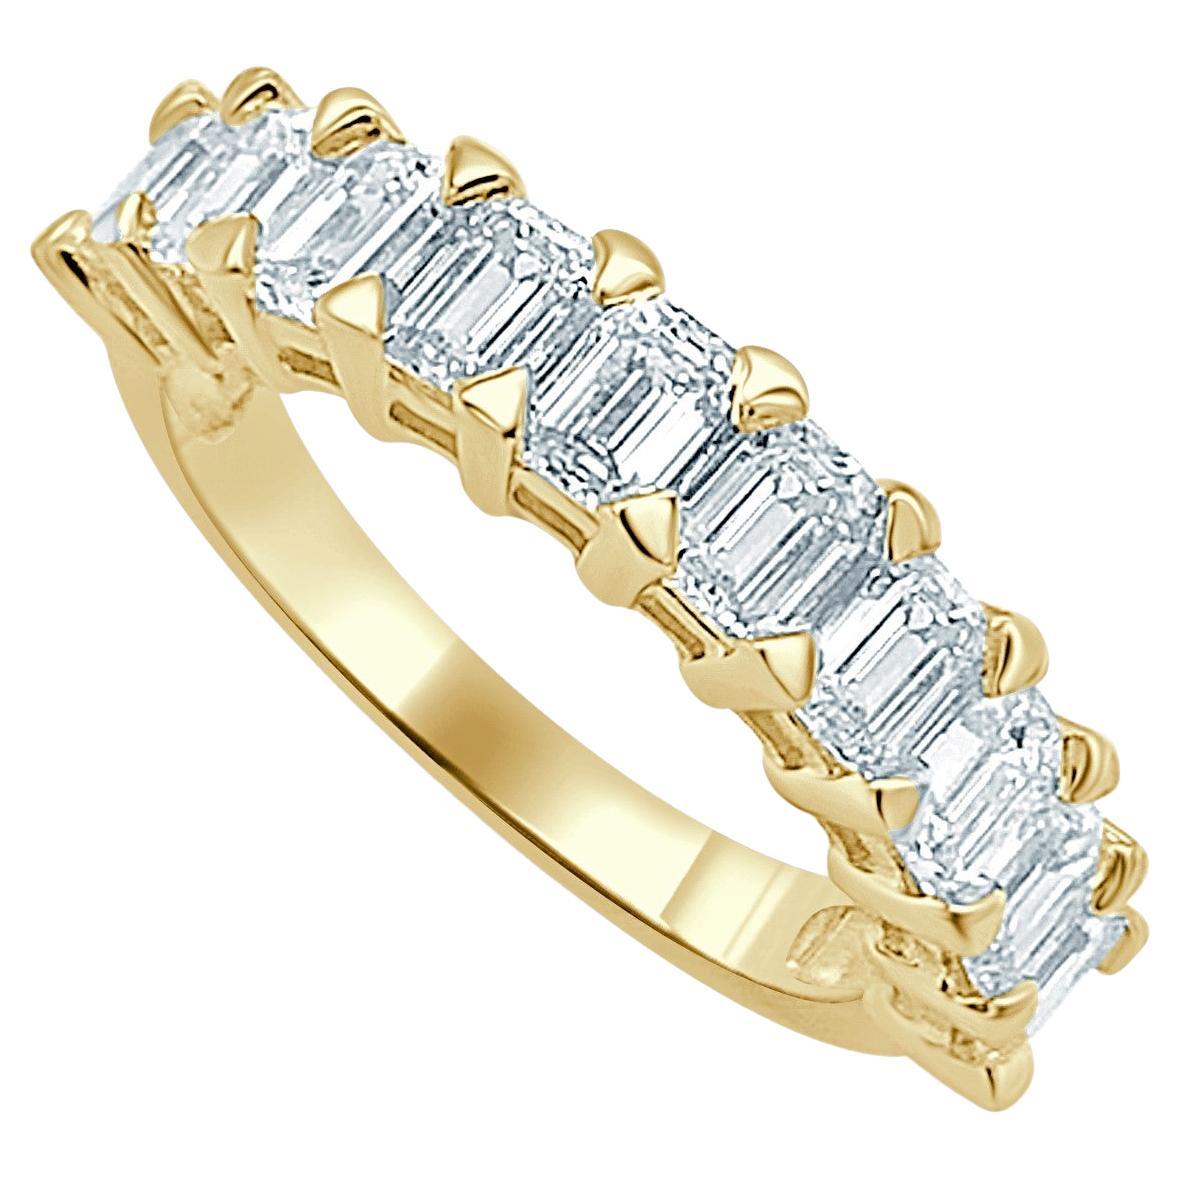 14K Yellow Gold Emerald Cut 2.00ct Diamond Ring for Her